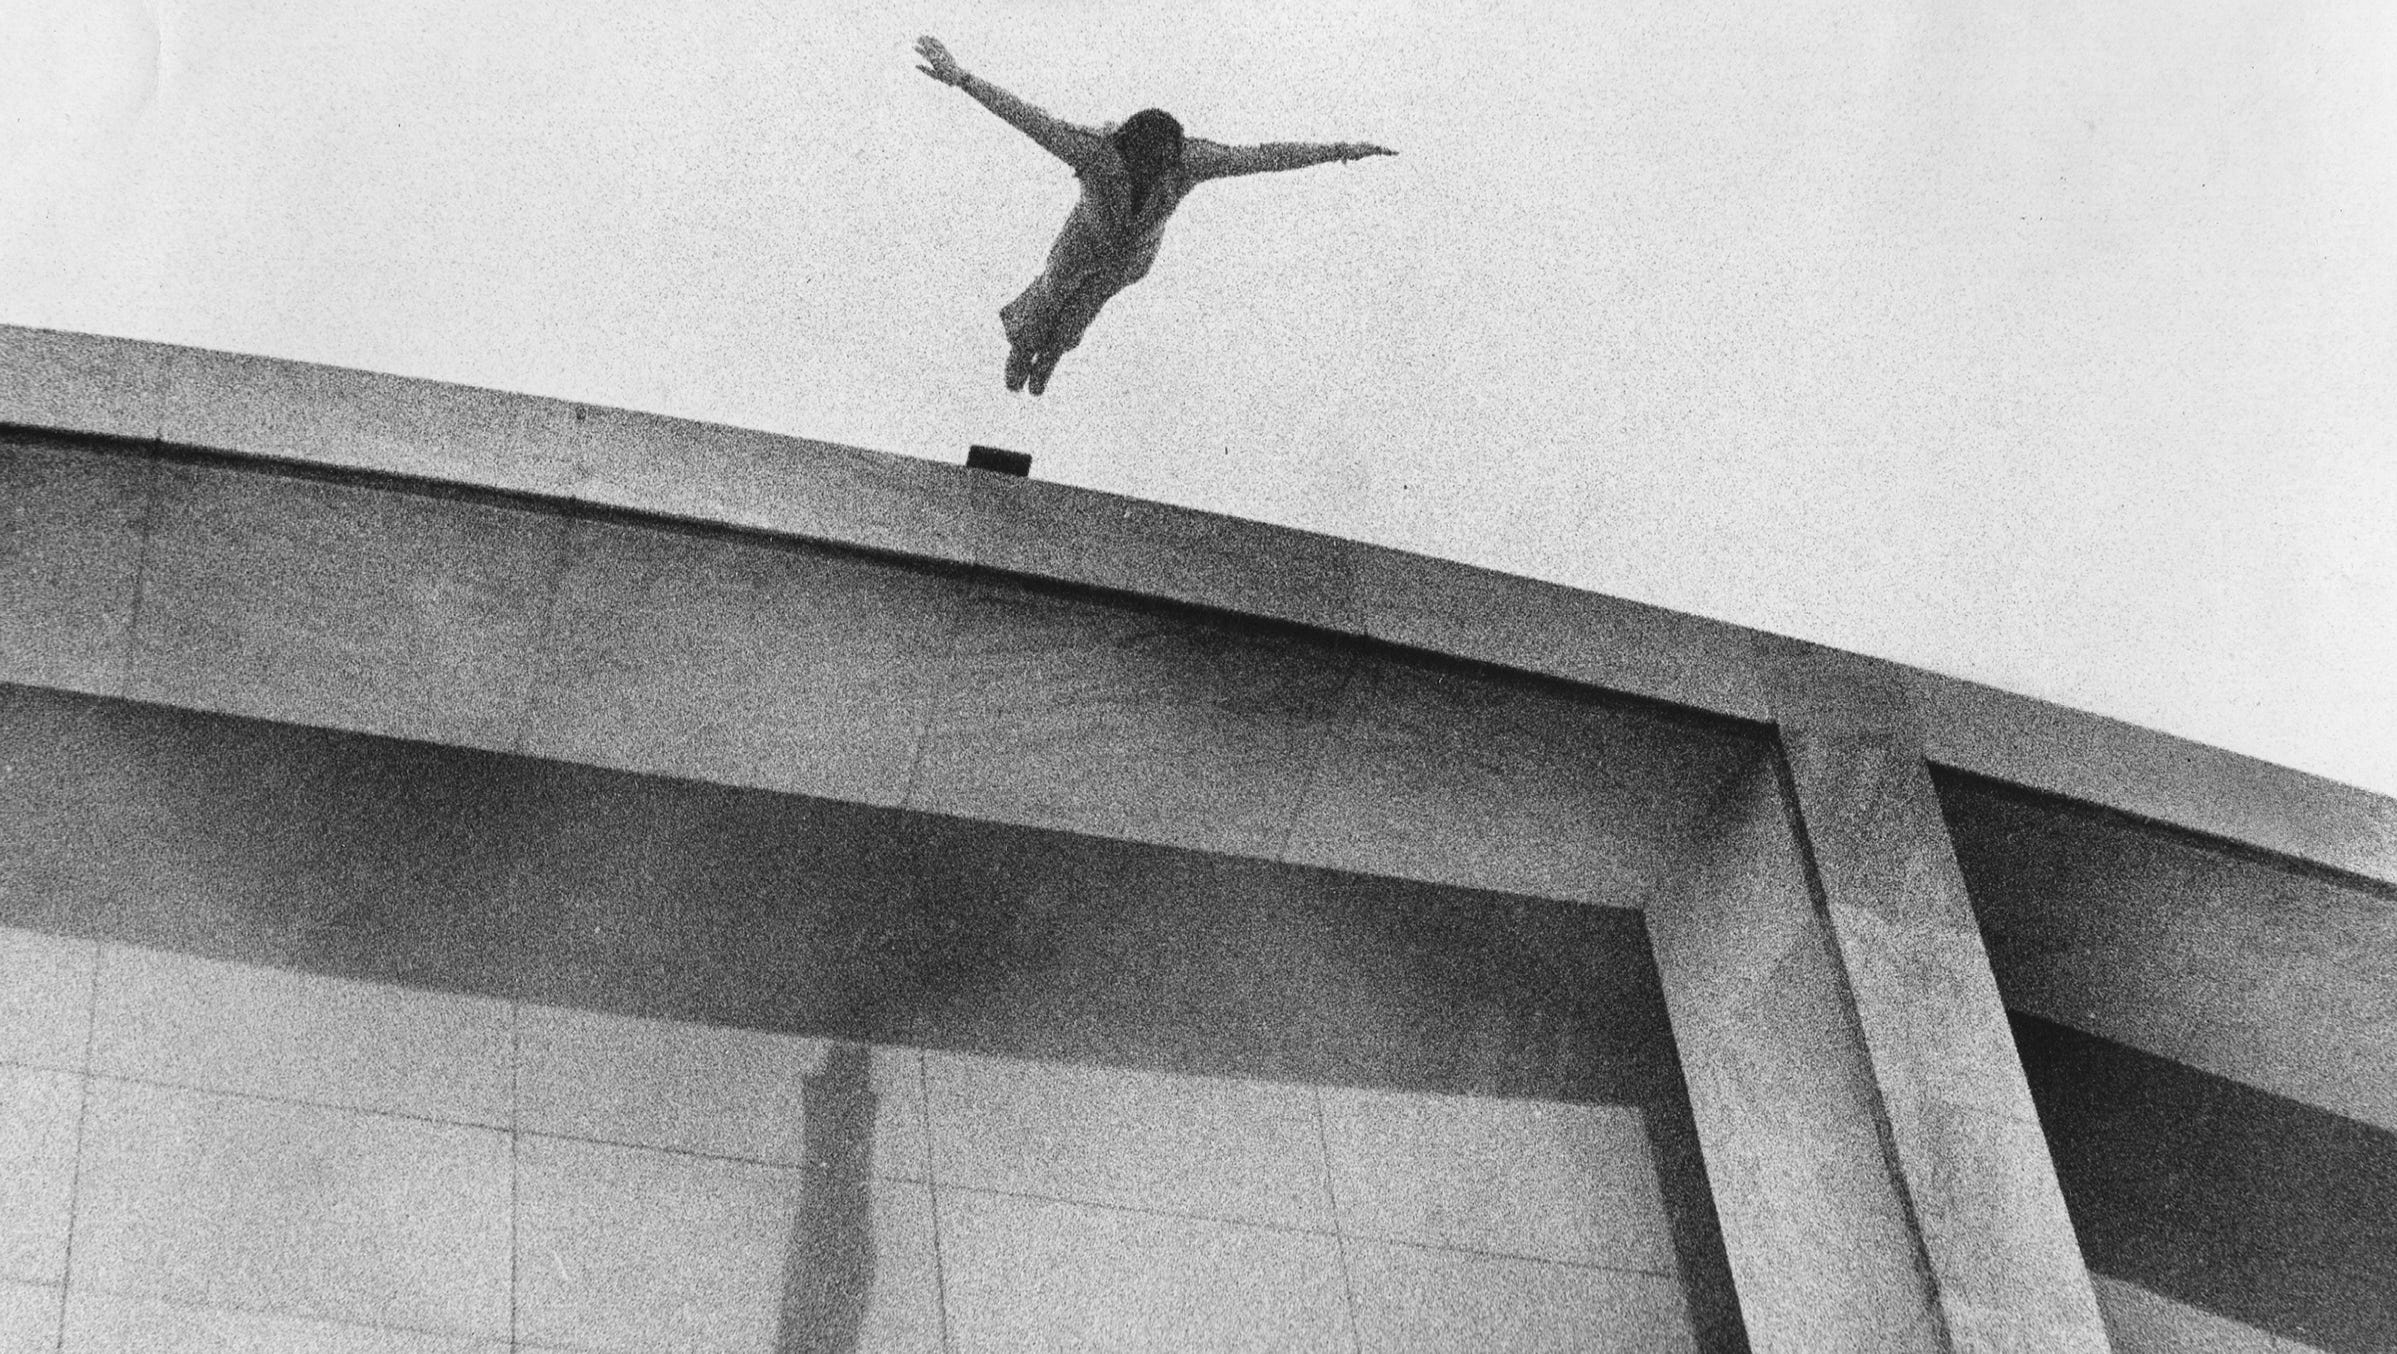 A stuntman dives from Cobo's roof on Dec. 30, 1975.